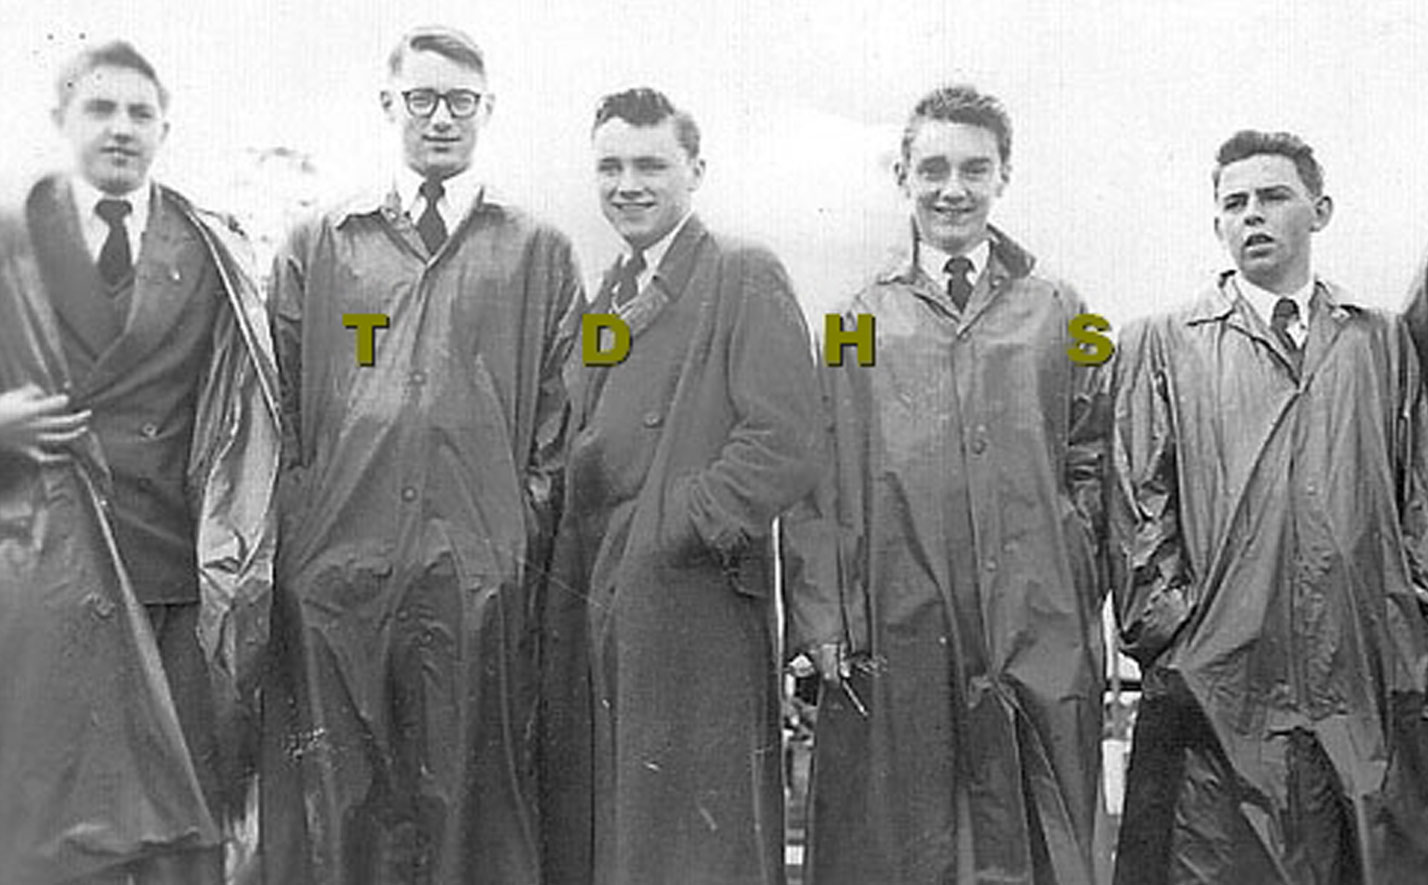 Blakc and white photo of five teenage school boys wearing uniforms and long coats